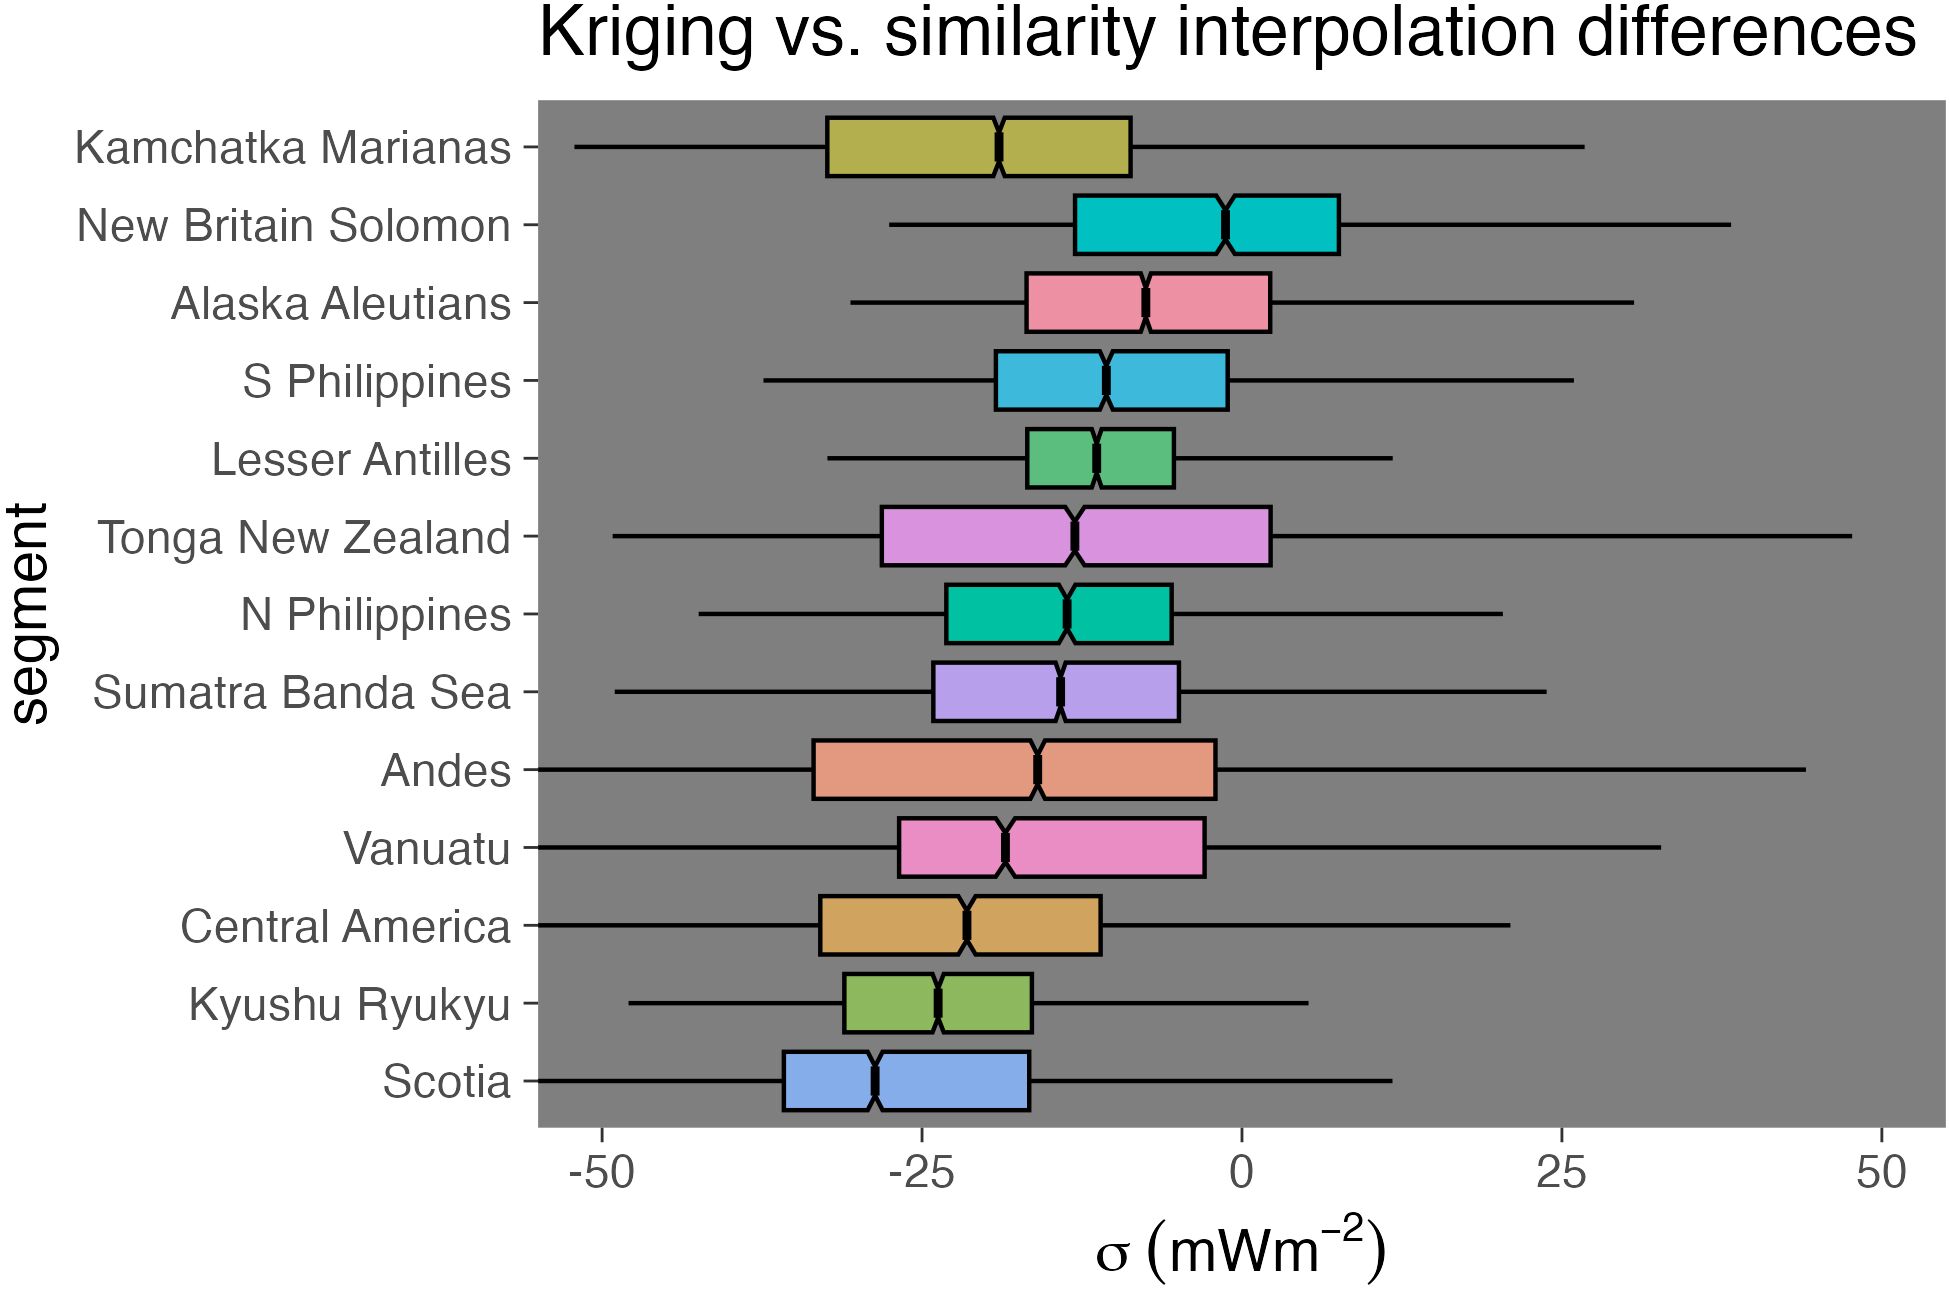 Summary of differences between Similarity and Kriging uncertainties computed as Similarity-Kriging. Differences are centered at slightly negative values with median differences ranging from -23 to -3 mW/m\(^2\), and relatively narrowly distributed with IQRs from 4 to 13 mW/m\(^2\) and some long tails extending from -50 to 70 mW/m\(^2\). Negative medians indicate greater uncertainties by Kriging compared to Similarity. Distributions are colored by quantiles (25%, 50%, 75%). Similarity data from Lucazeau (2019). Refer to Figure B.4 for estimate differences.